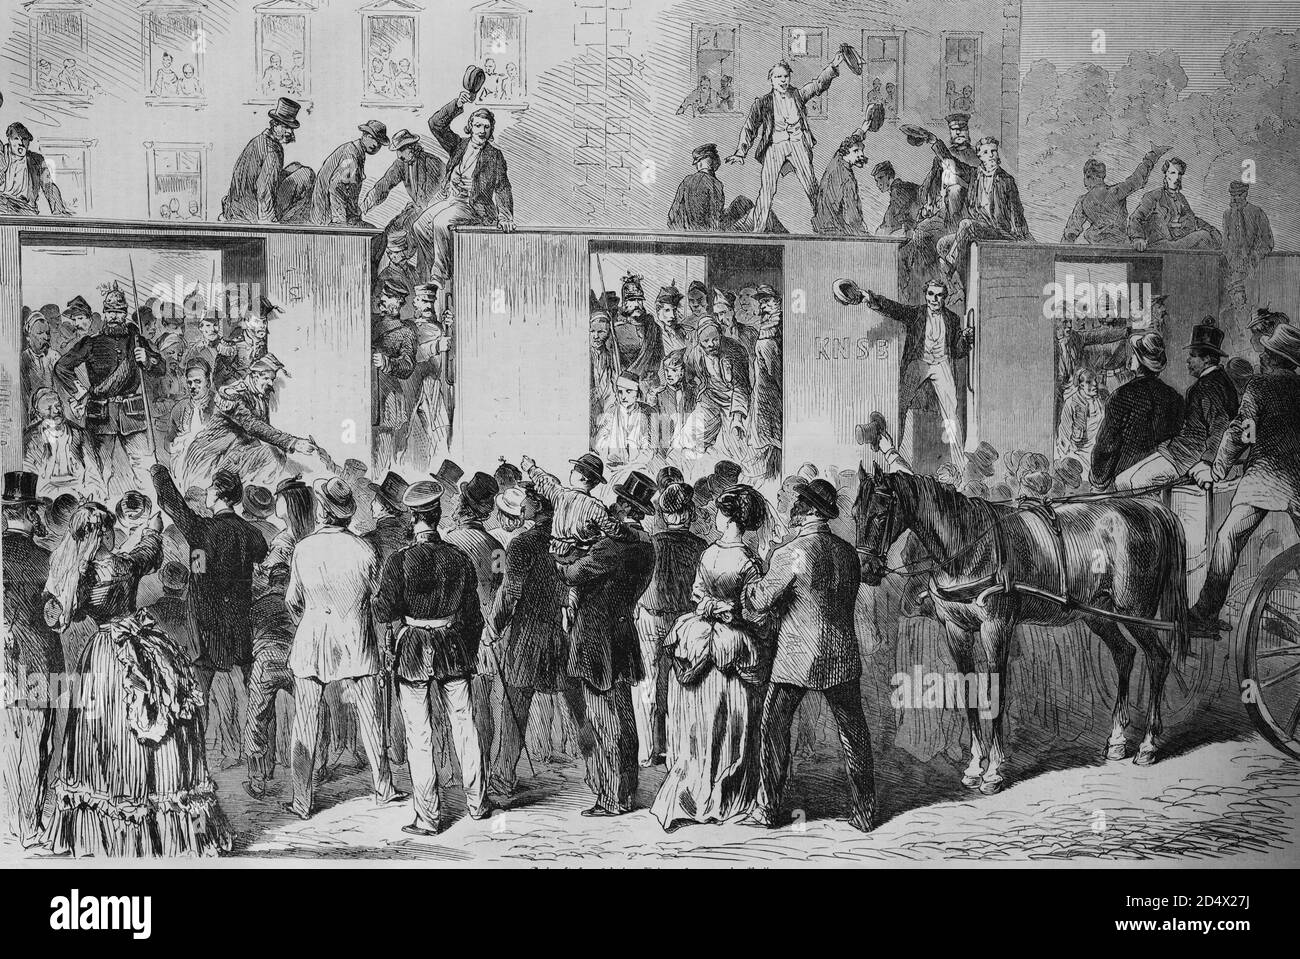 Arrival of French prisoners of war at the East train station in Berlin, illustrated war history, German - French war 1870-1871 Stock Photo